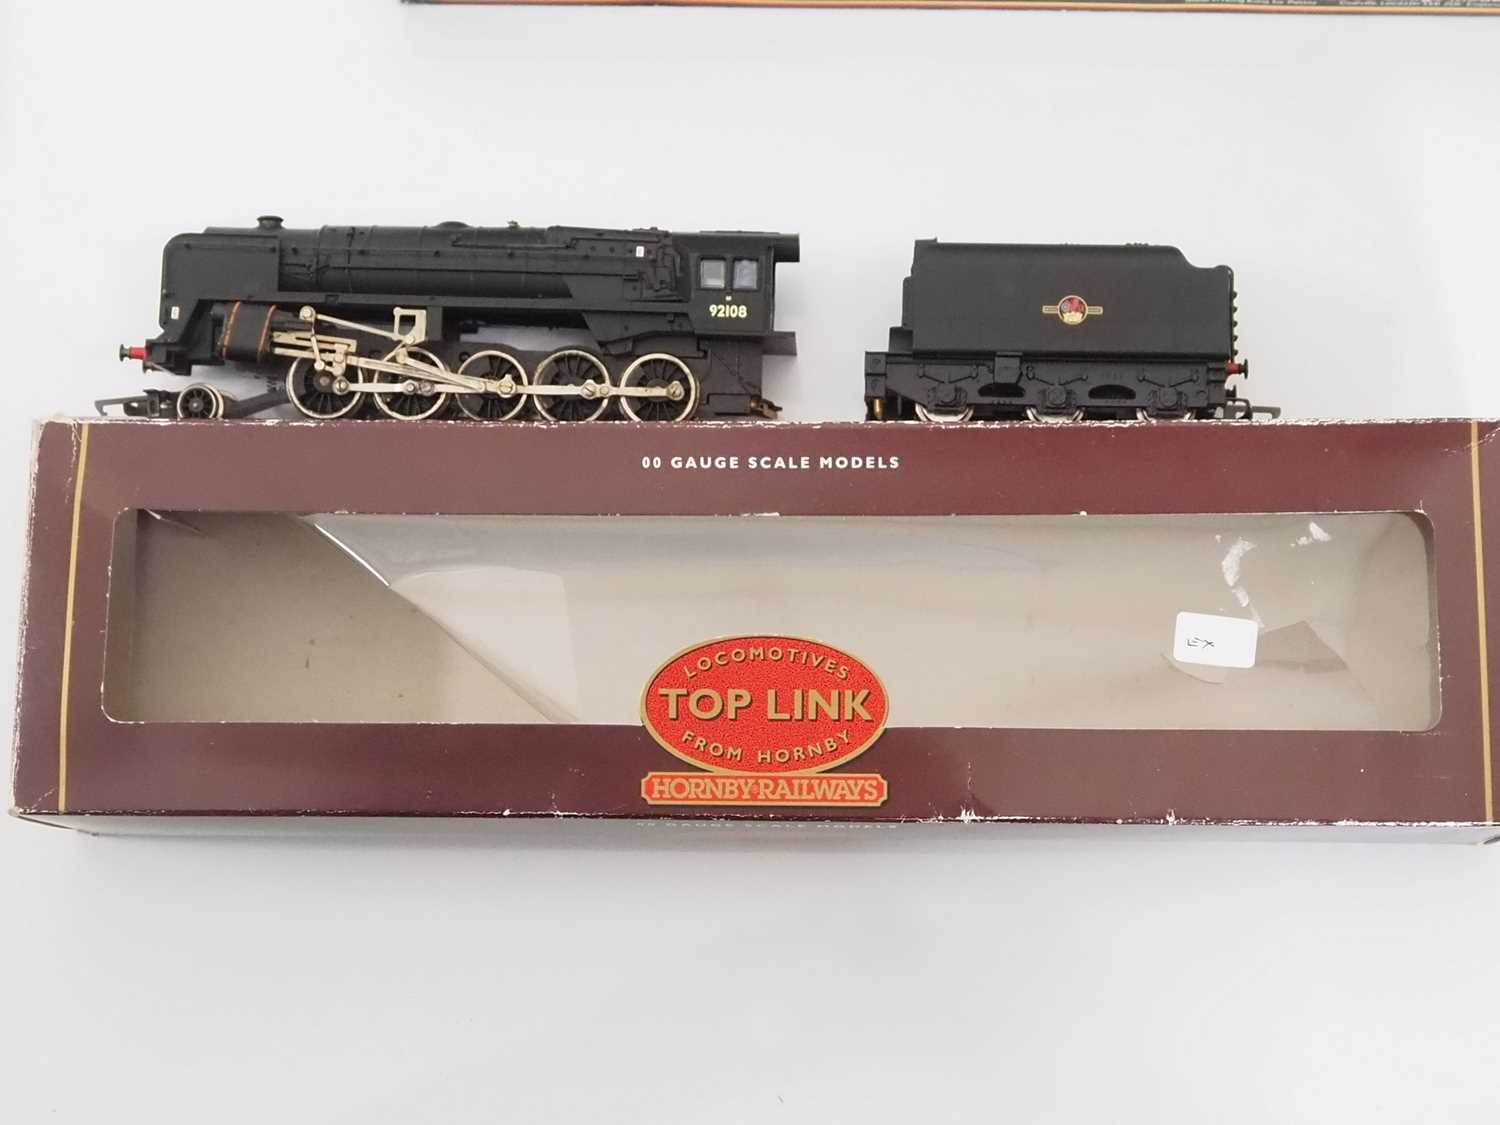 A group of OO gauge steam locos by BACHMANN, DAPOL, MAINLINE and HORNBY all in various BR liveries - - Image 6 of 7